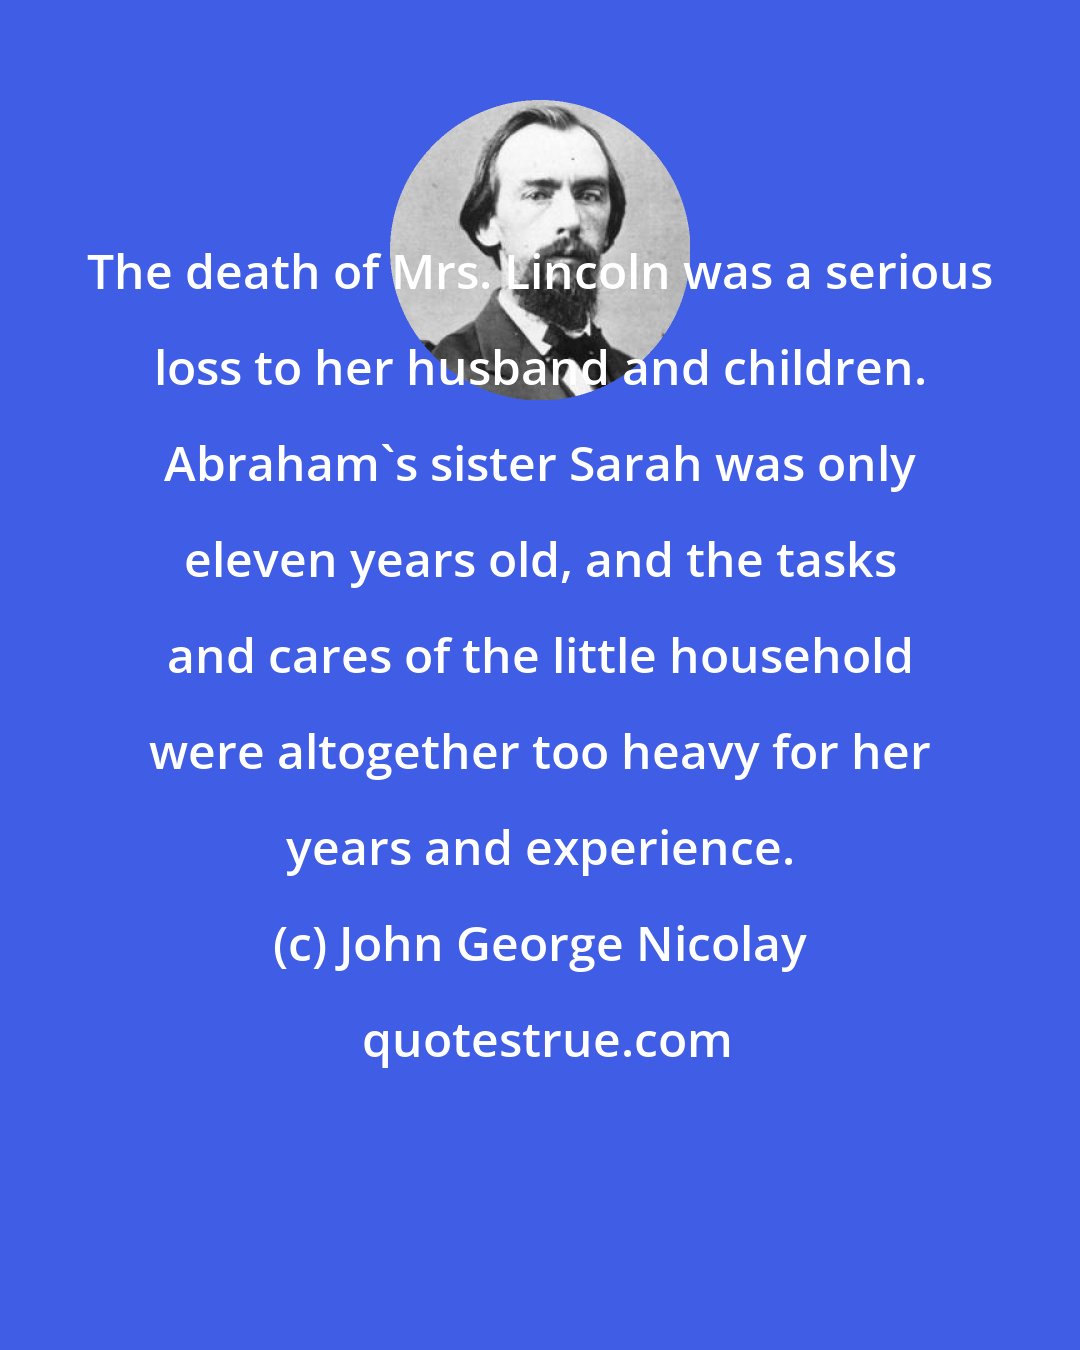 John George Nicolay: The death of Mrs. Lincoln was a serious loss to her husband and children. Abraham's sister Sarah was only eleven years old, and the tasks and cares of the little household were altogether too heavy for her years and experience.